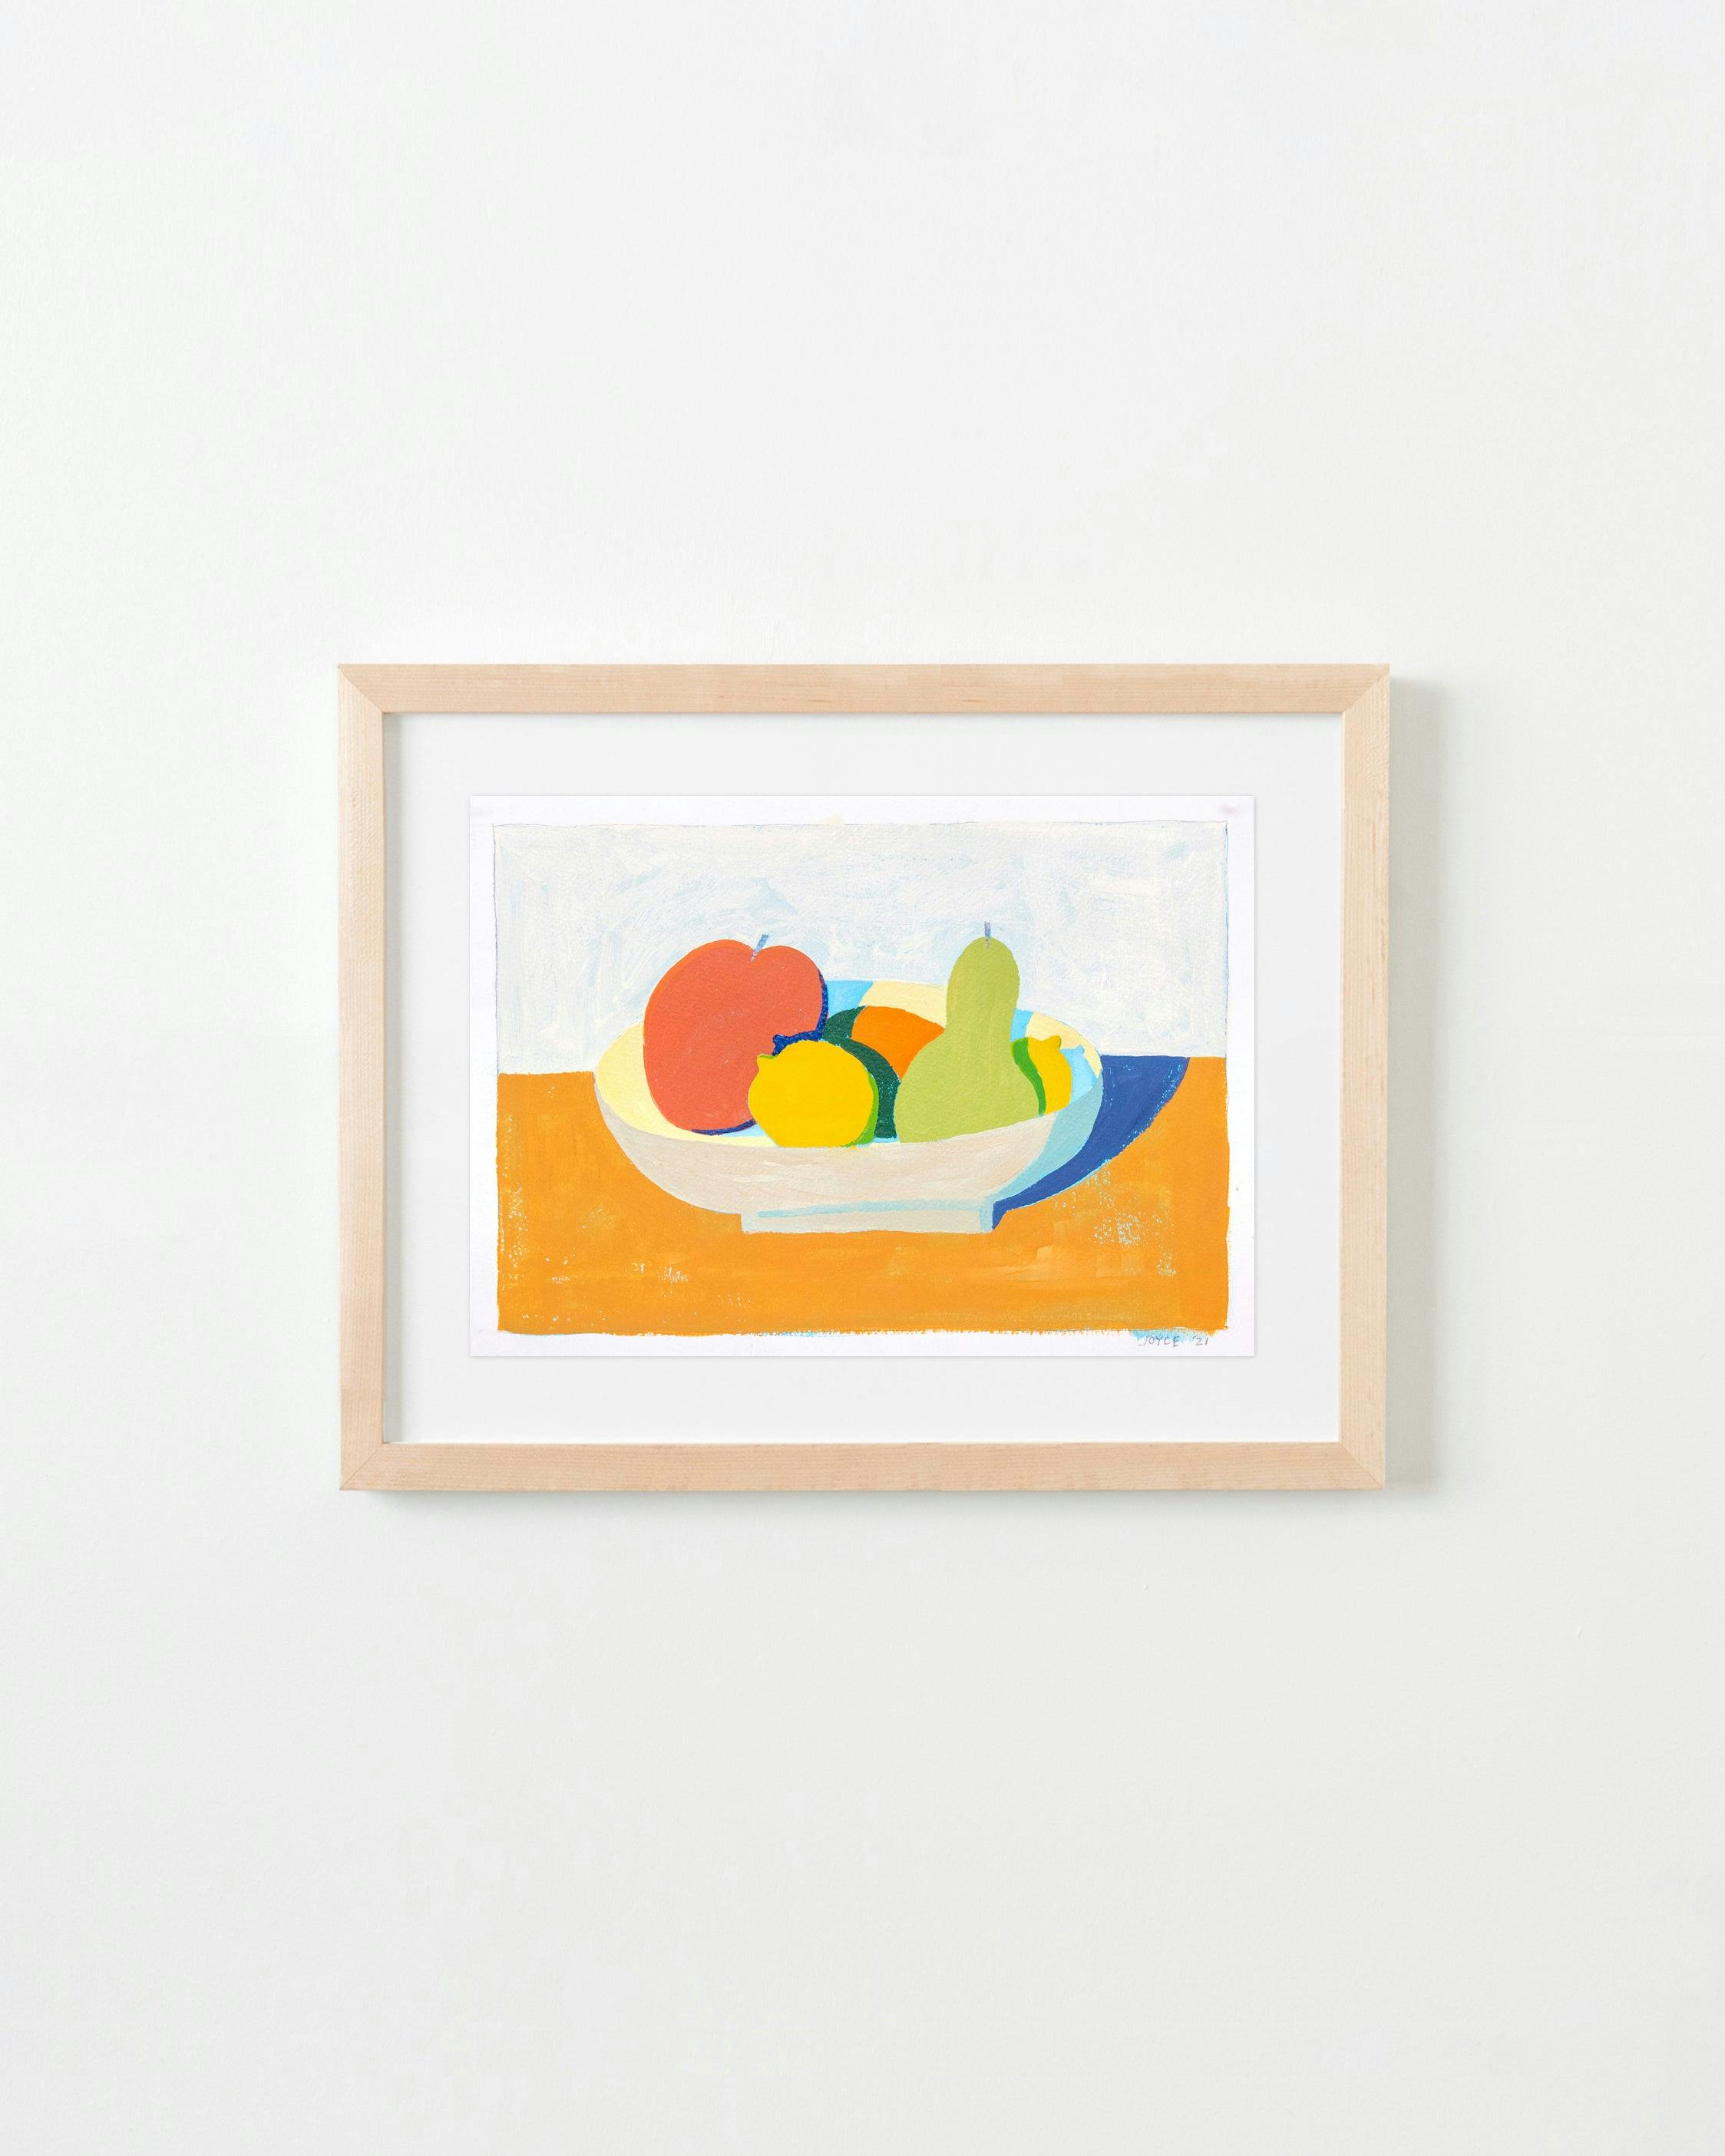 Painting by Jackson Joyce titled "Some Fruit #2".